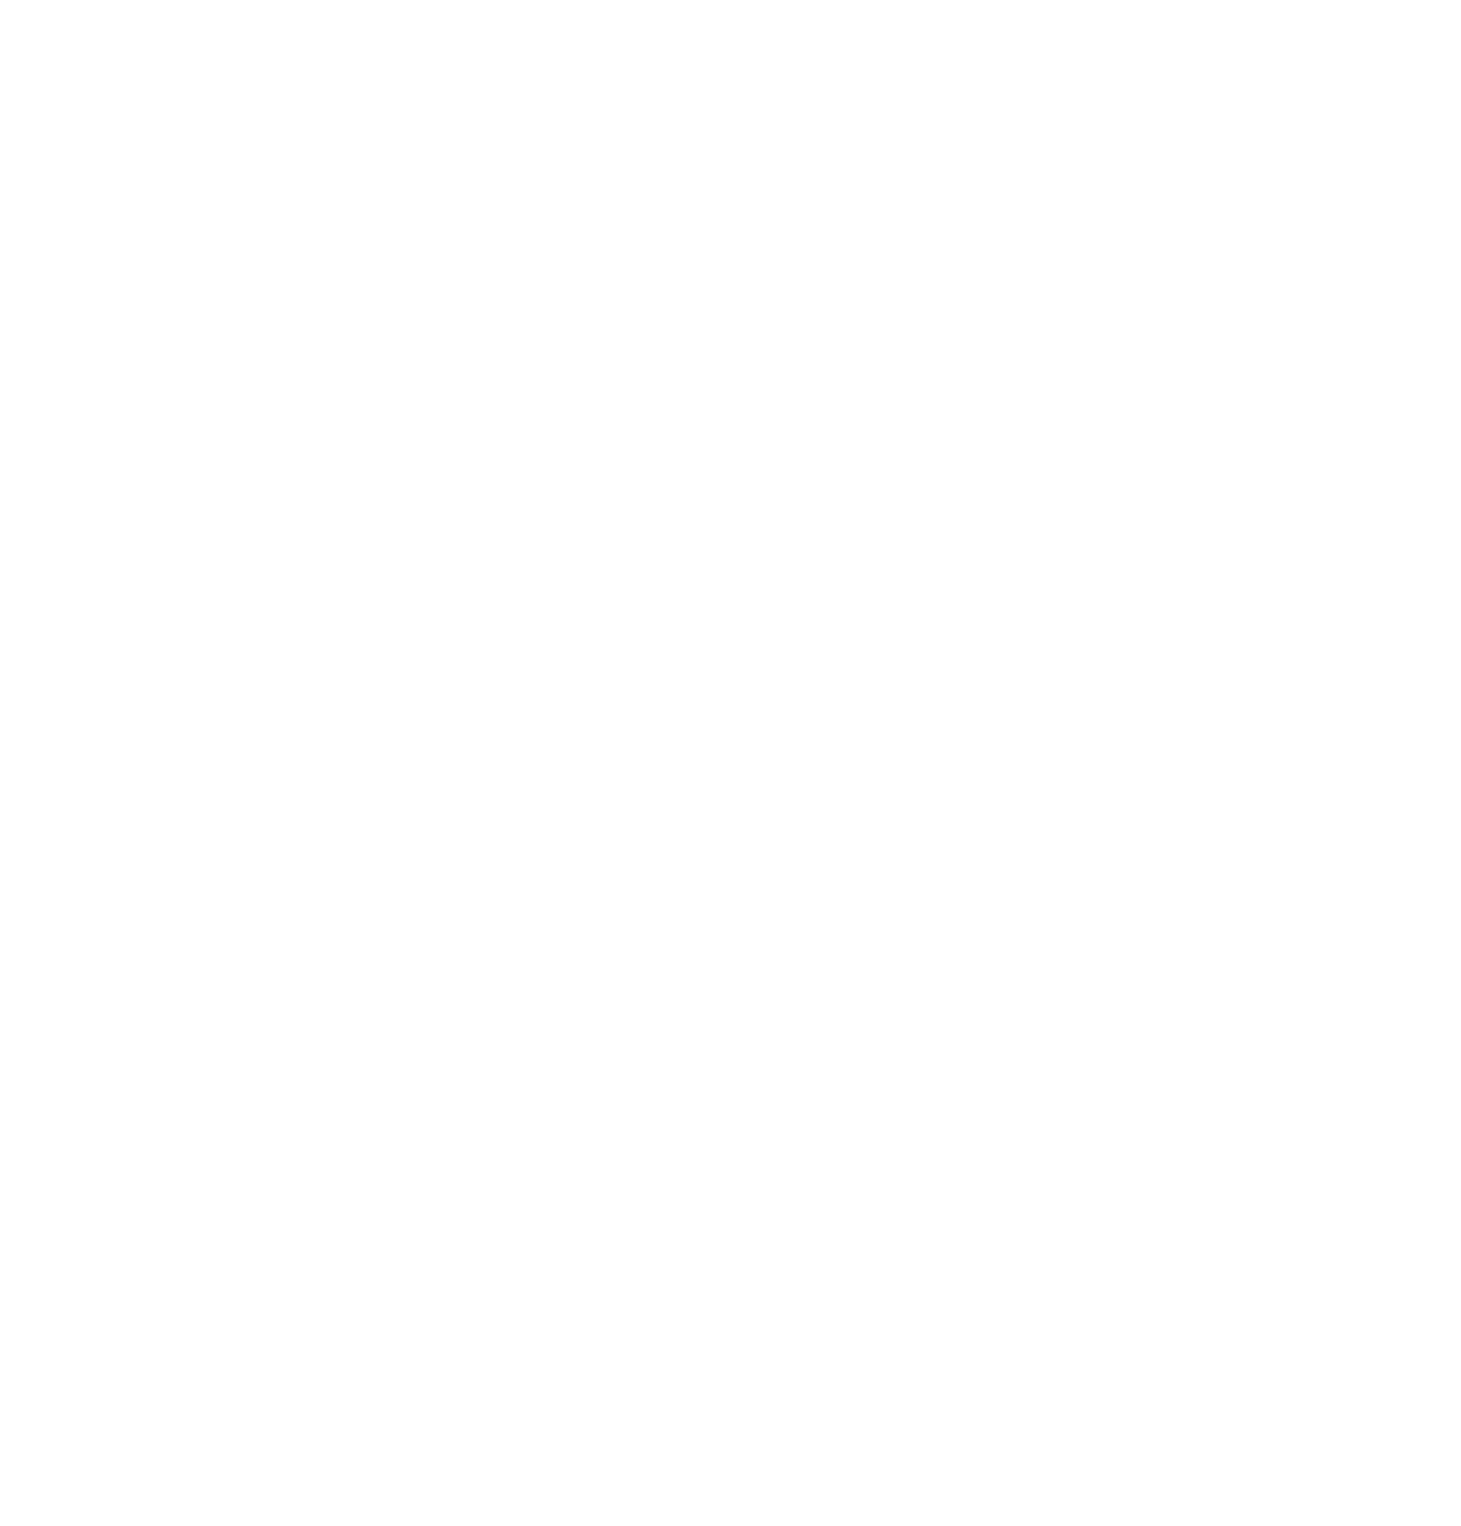 Pacific Basin Shipping logo for dark backgrounds (transparent PNG)